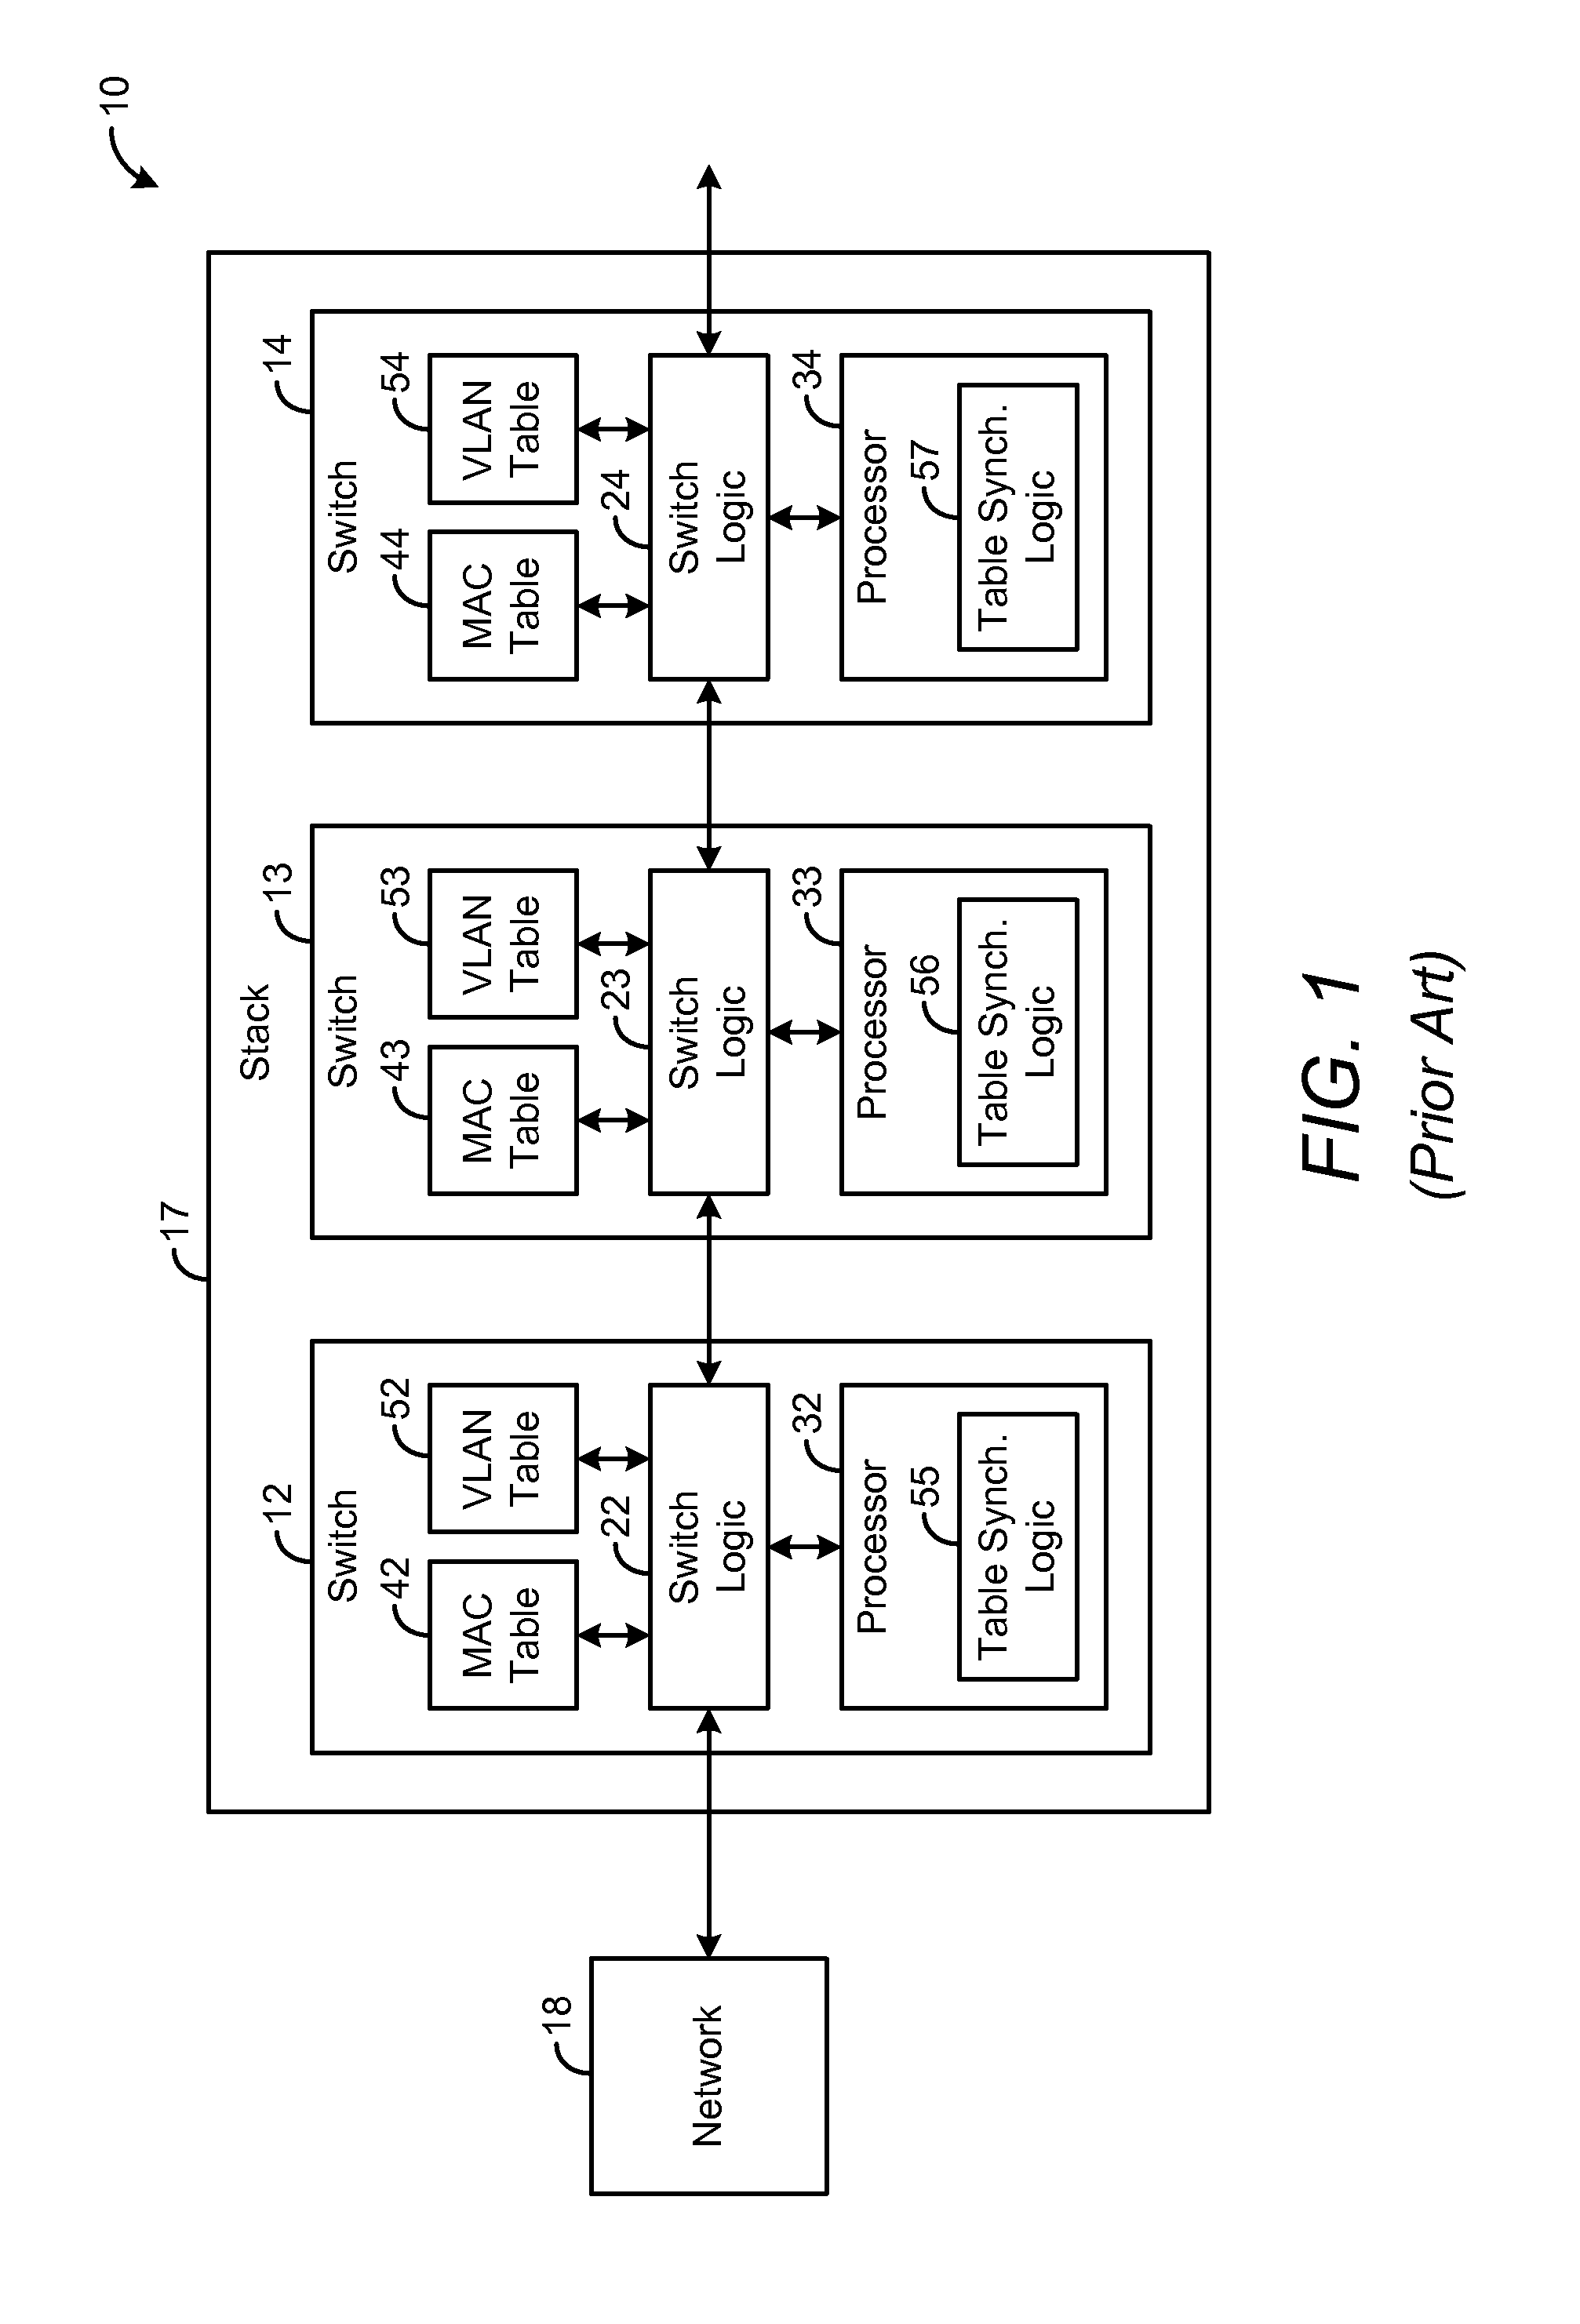 Systems and methods for disseminating addresses in distributed switching environments